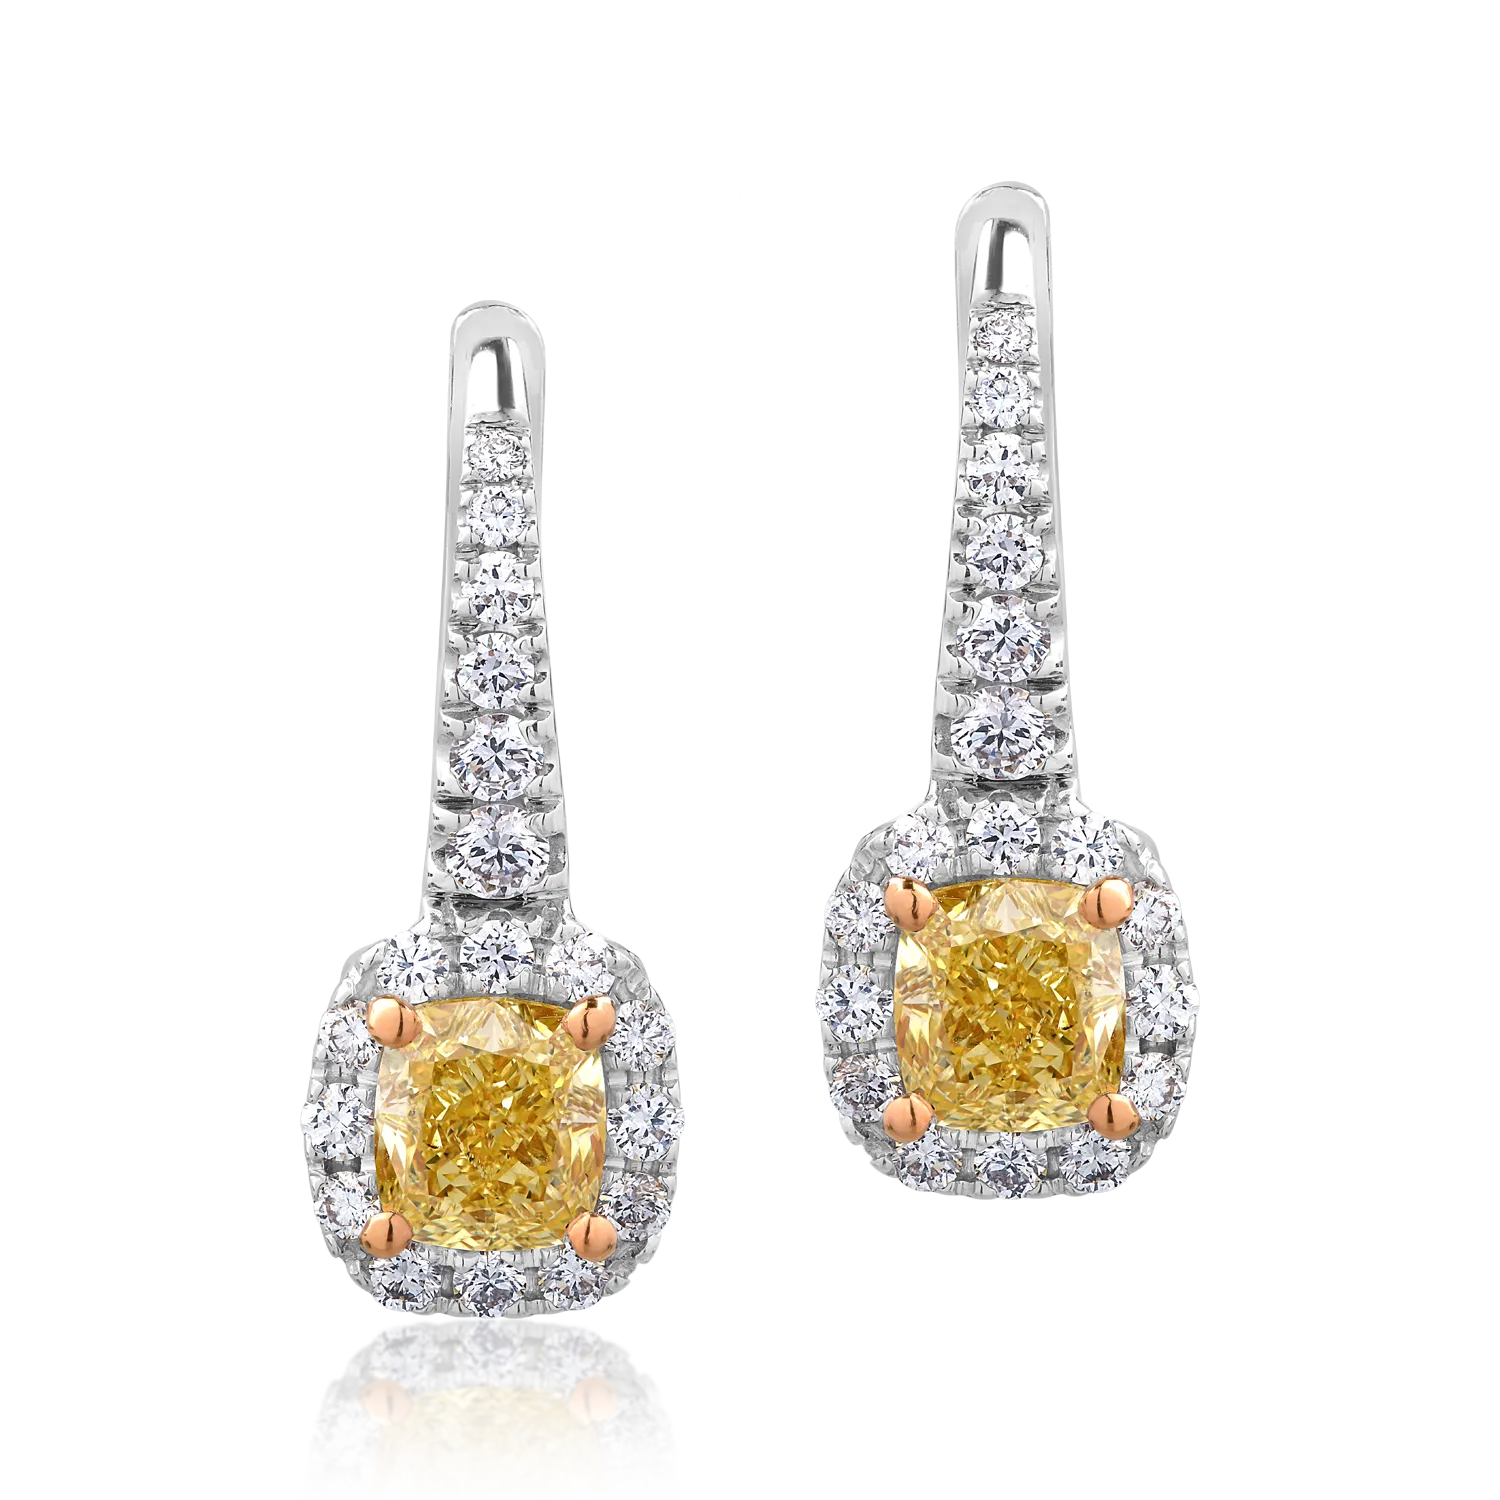 18K white gold earrings with 1.19ct fancy-yellow diamonds and 0.52ct clear diamonds